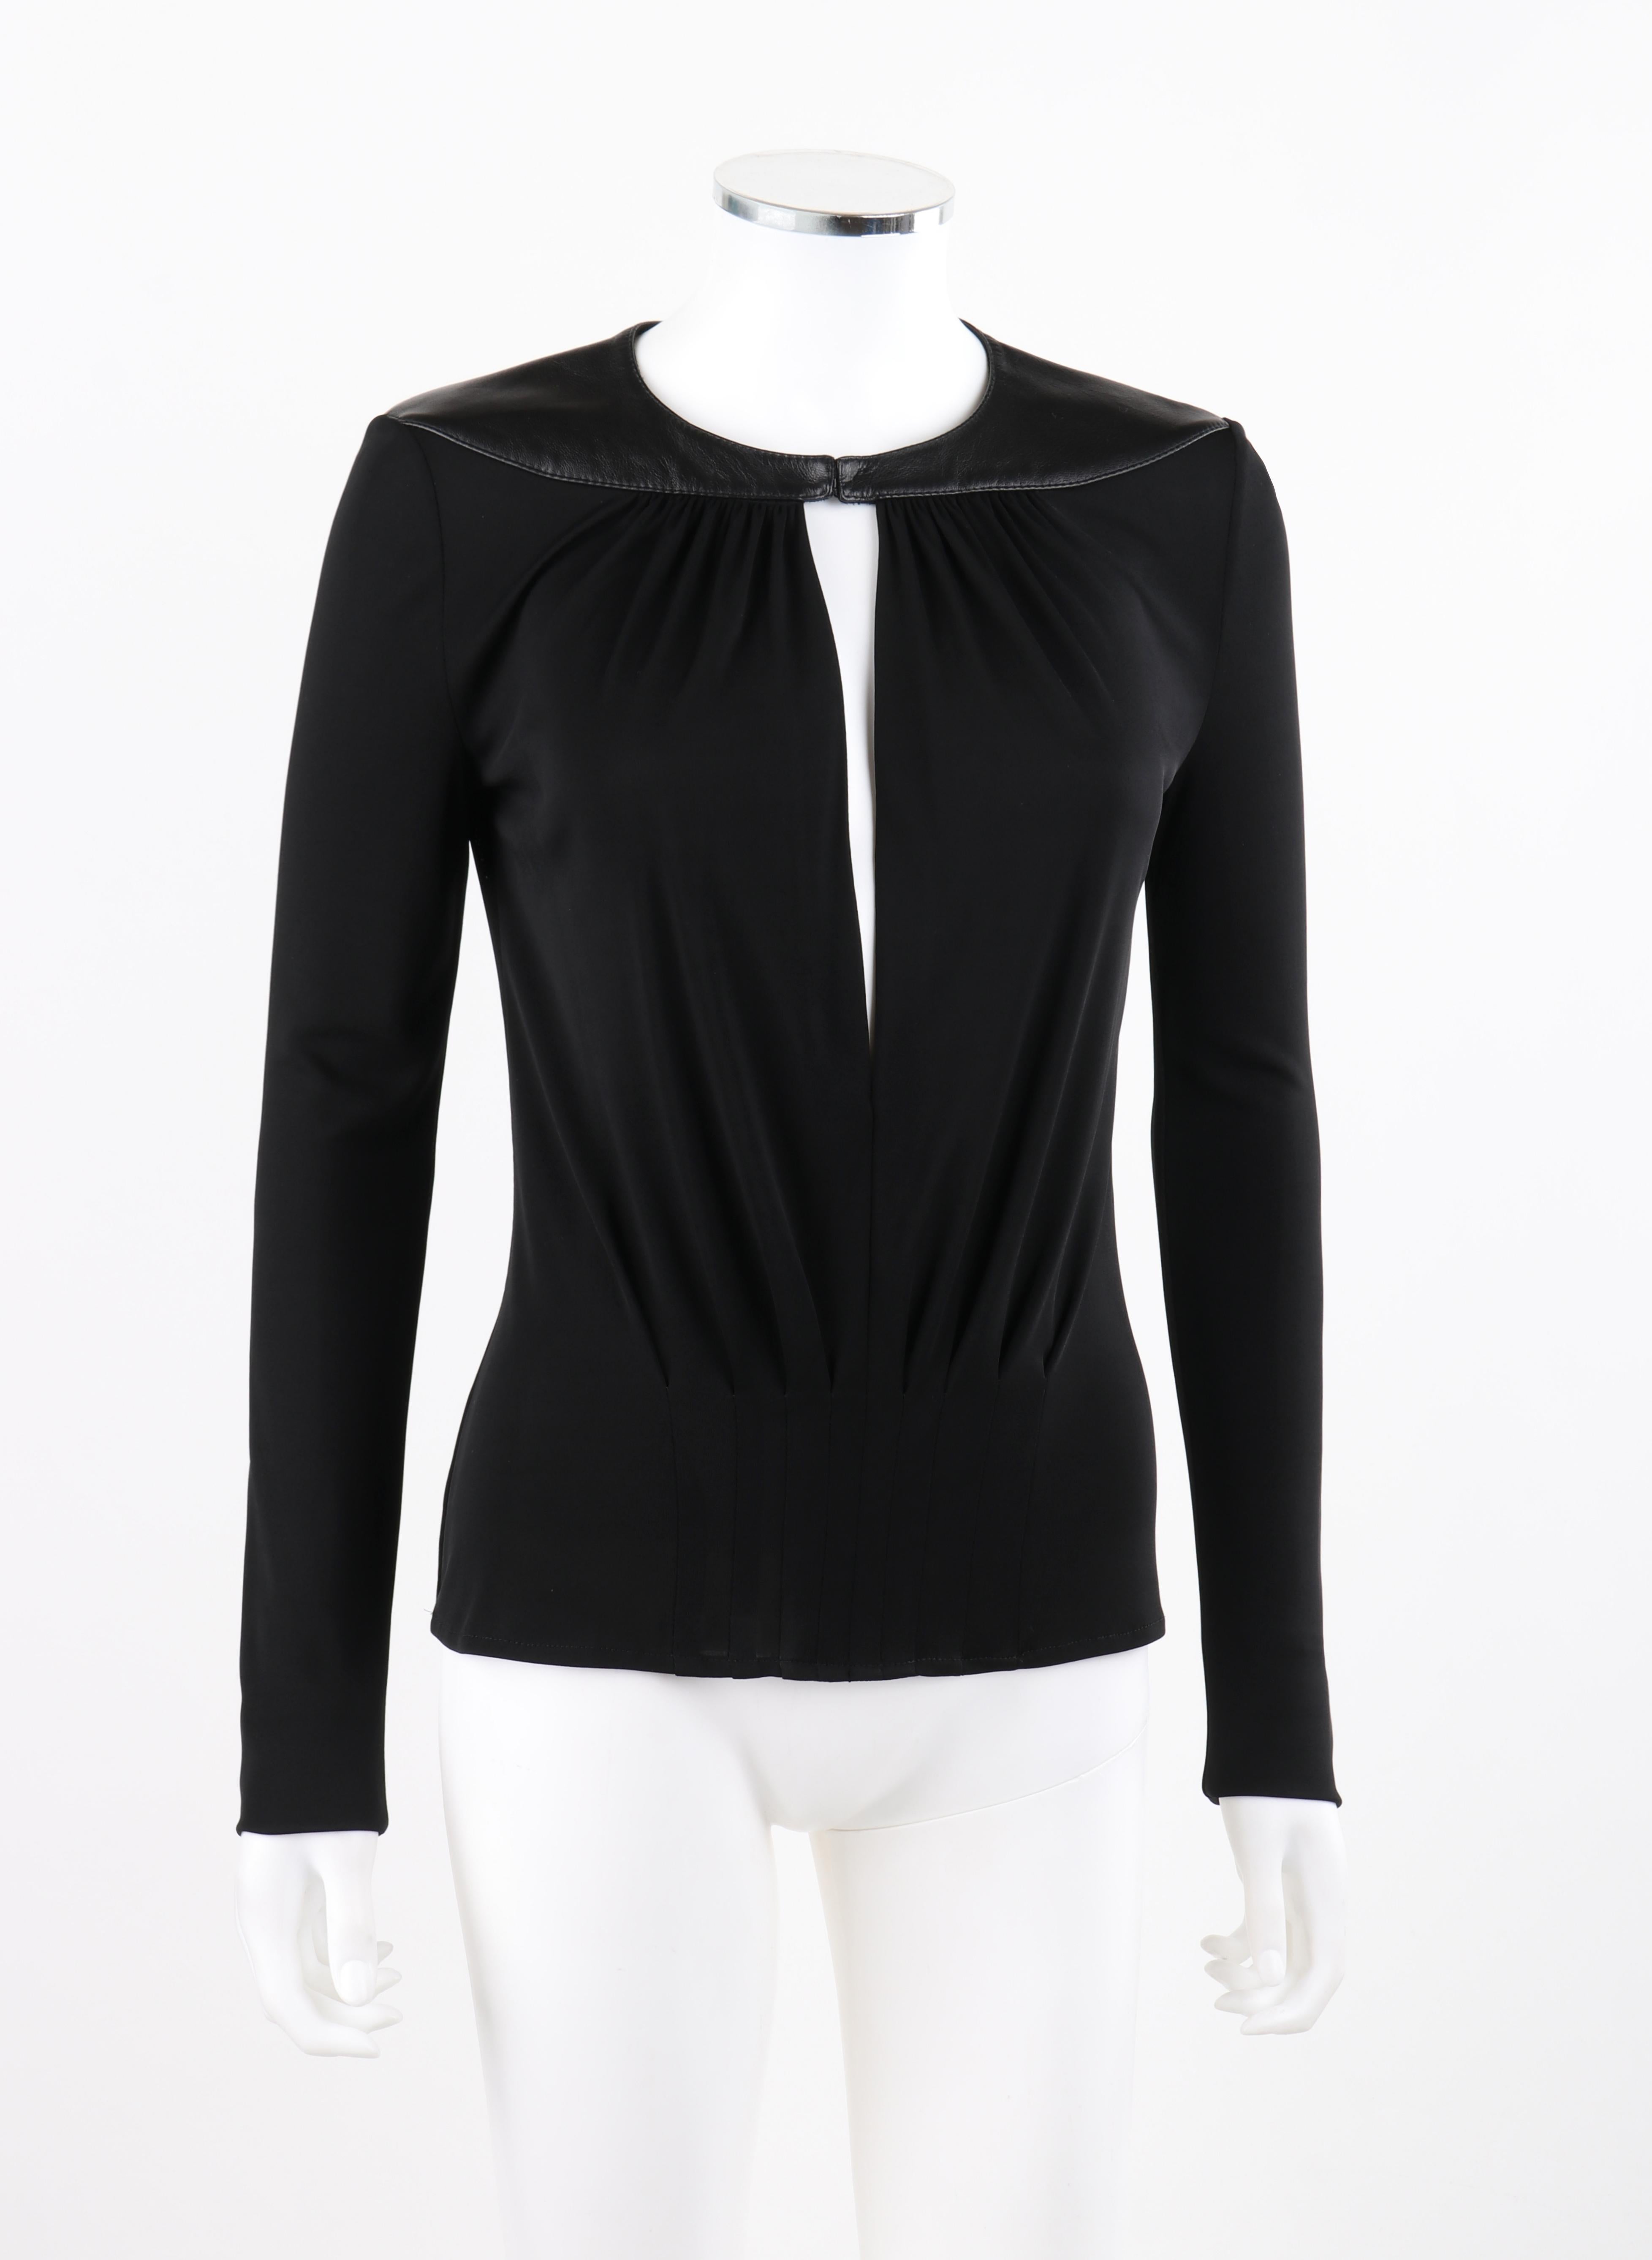 GIANNI VERSACE Couture A/W 1997 Black Cutout Leather Knit Gather Pleated Blouse  In Good Condition For Sale In Thiensville, WI